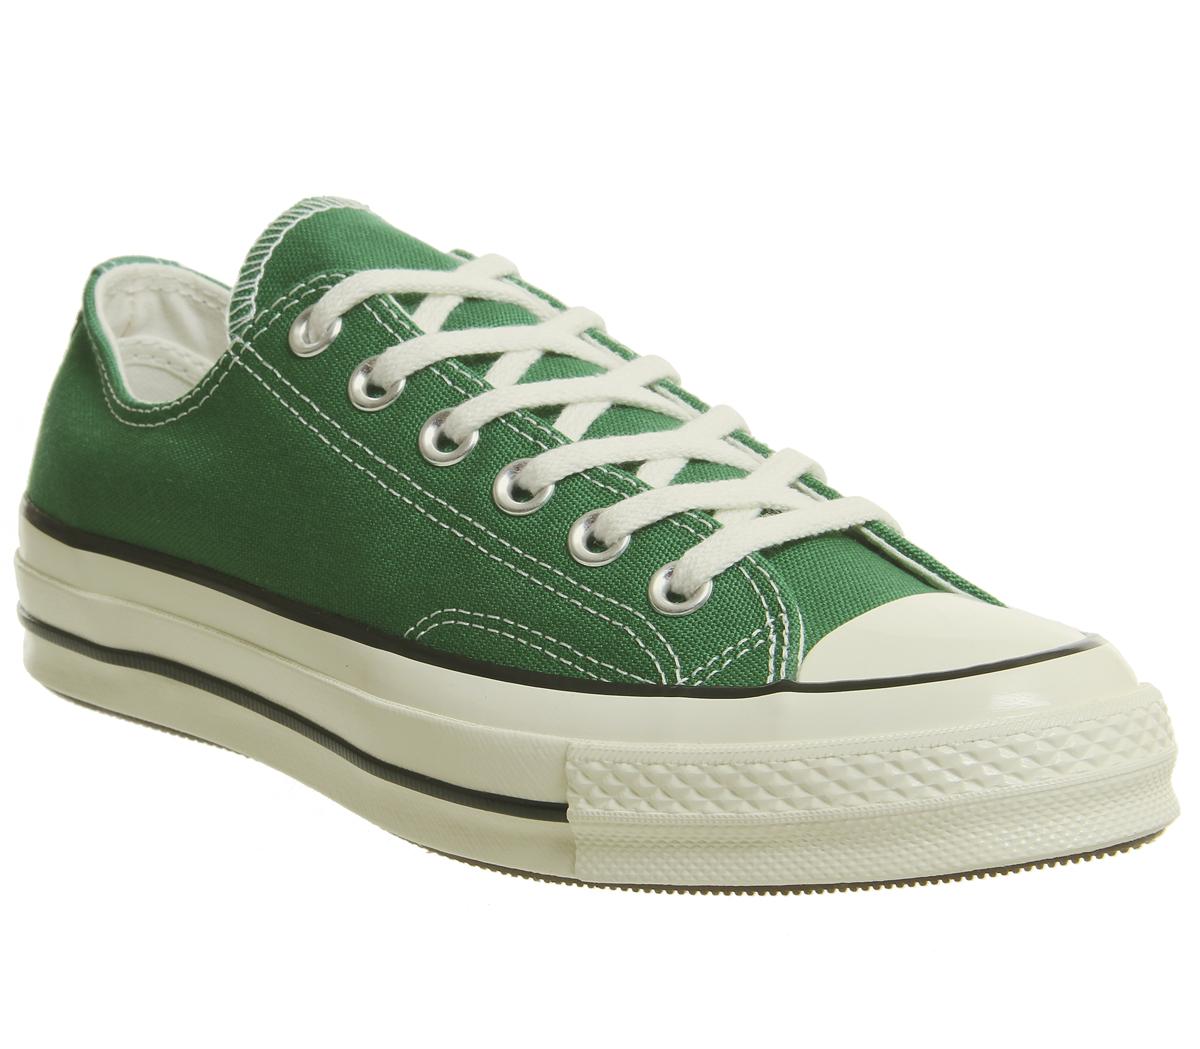 converse all star ox 70's trainers green black egret